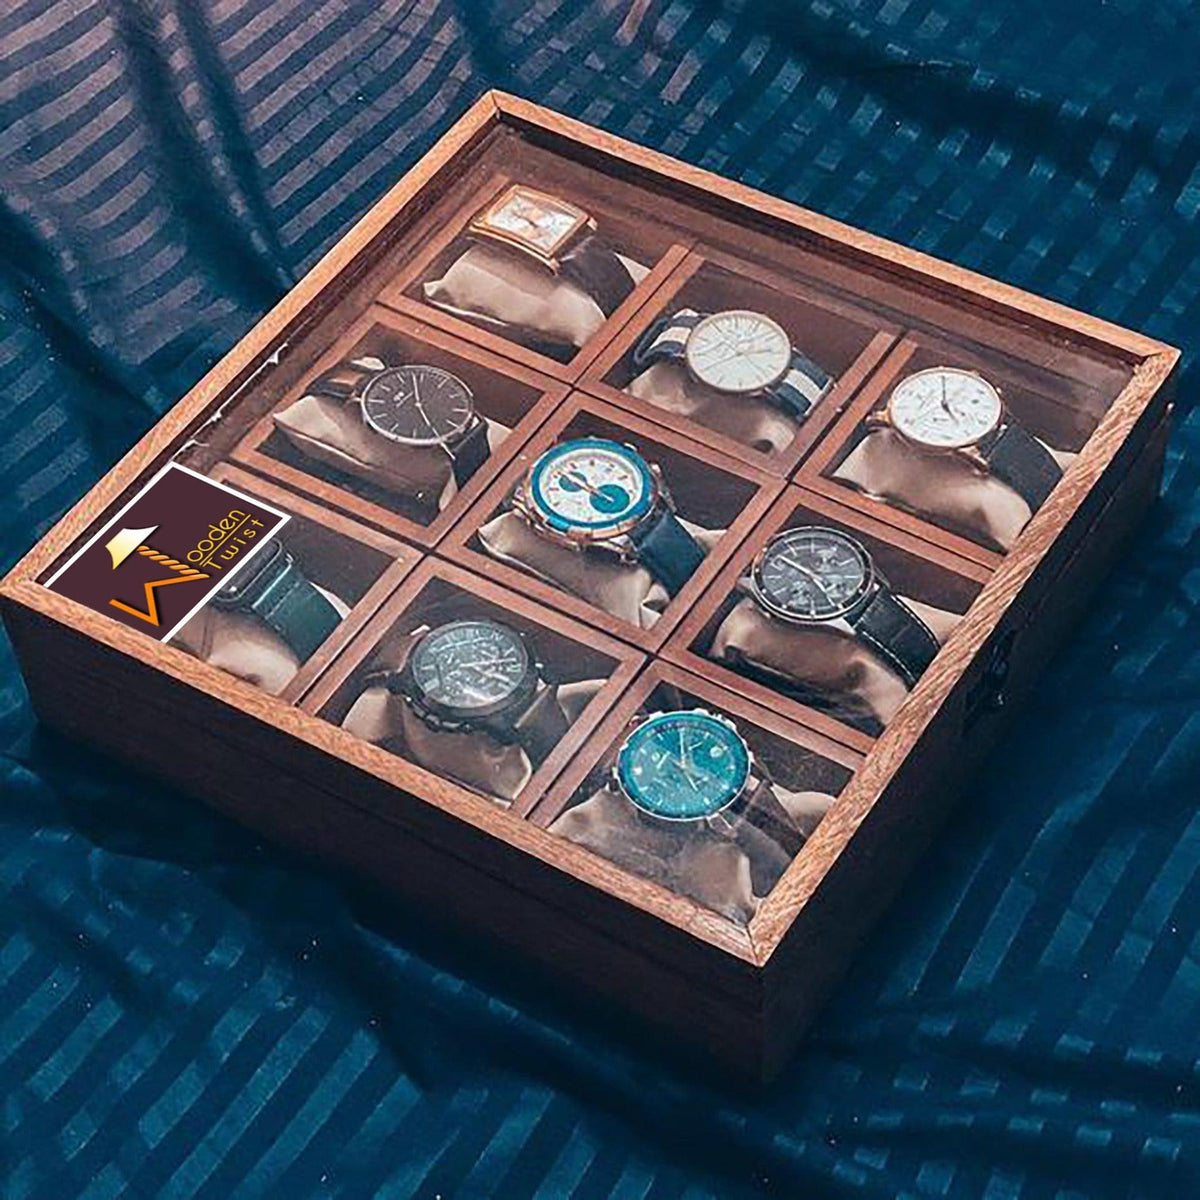 Buy Wood Watch Box With 9 Compartments Online